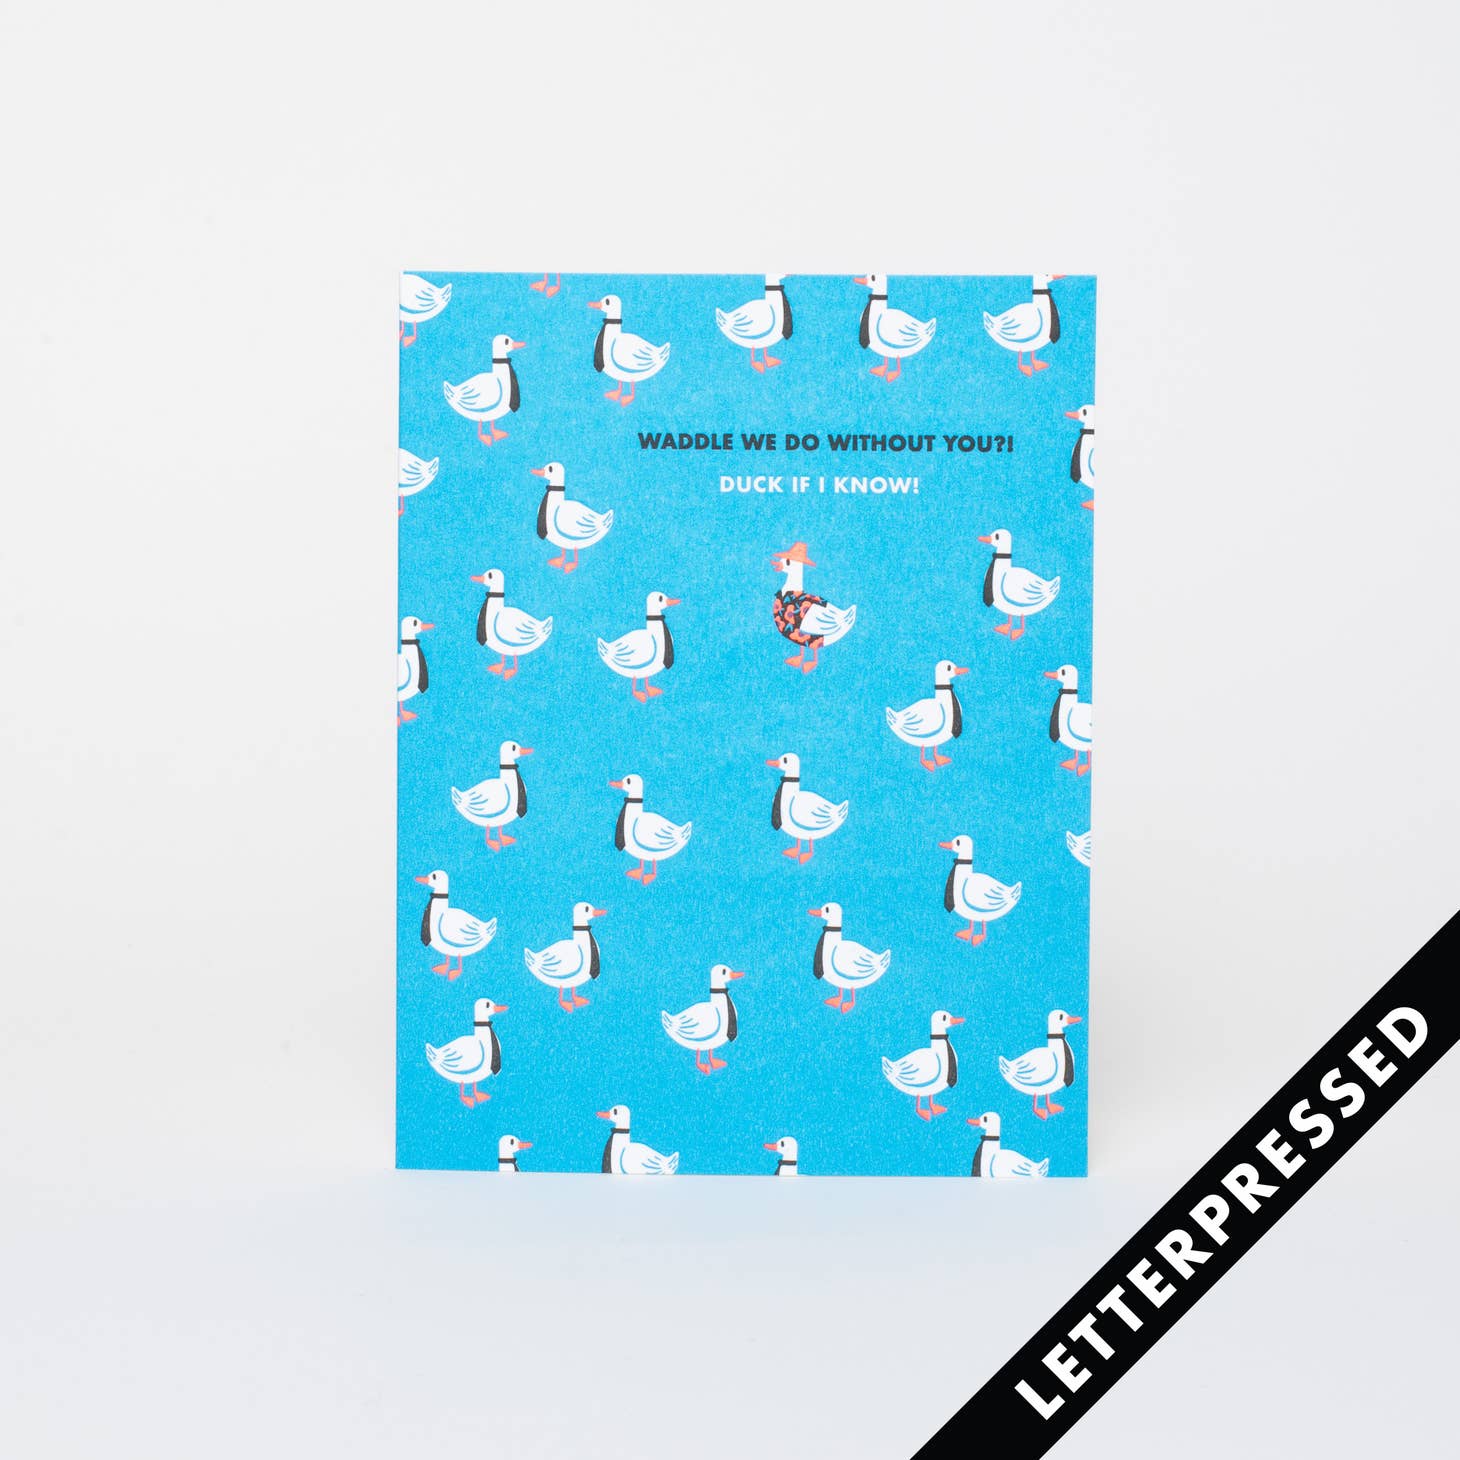 Blue background with images of white ducks in a tie and black text says, "Waddle we do without you?!" and white text says, "Duck if I know". Kraft envelope is included. 